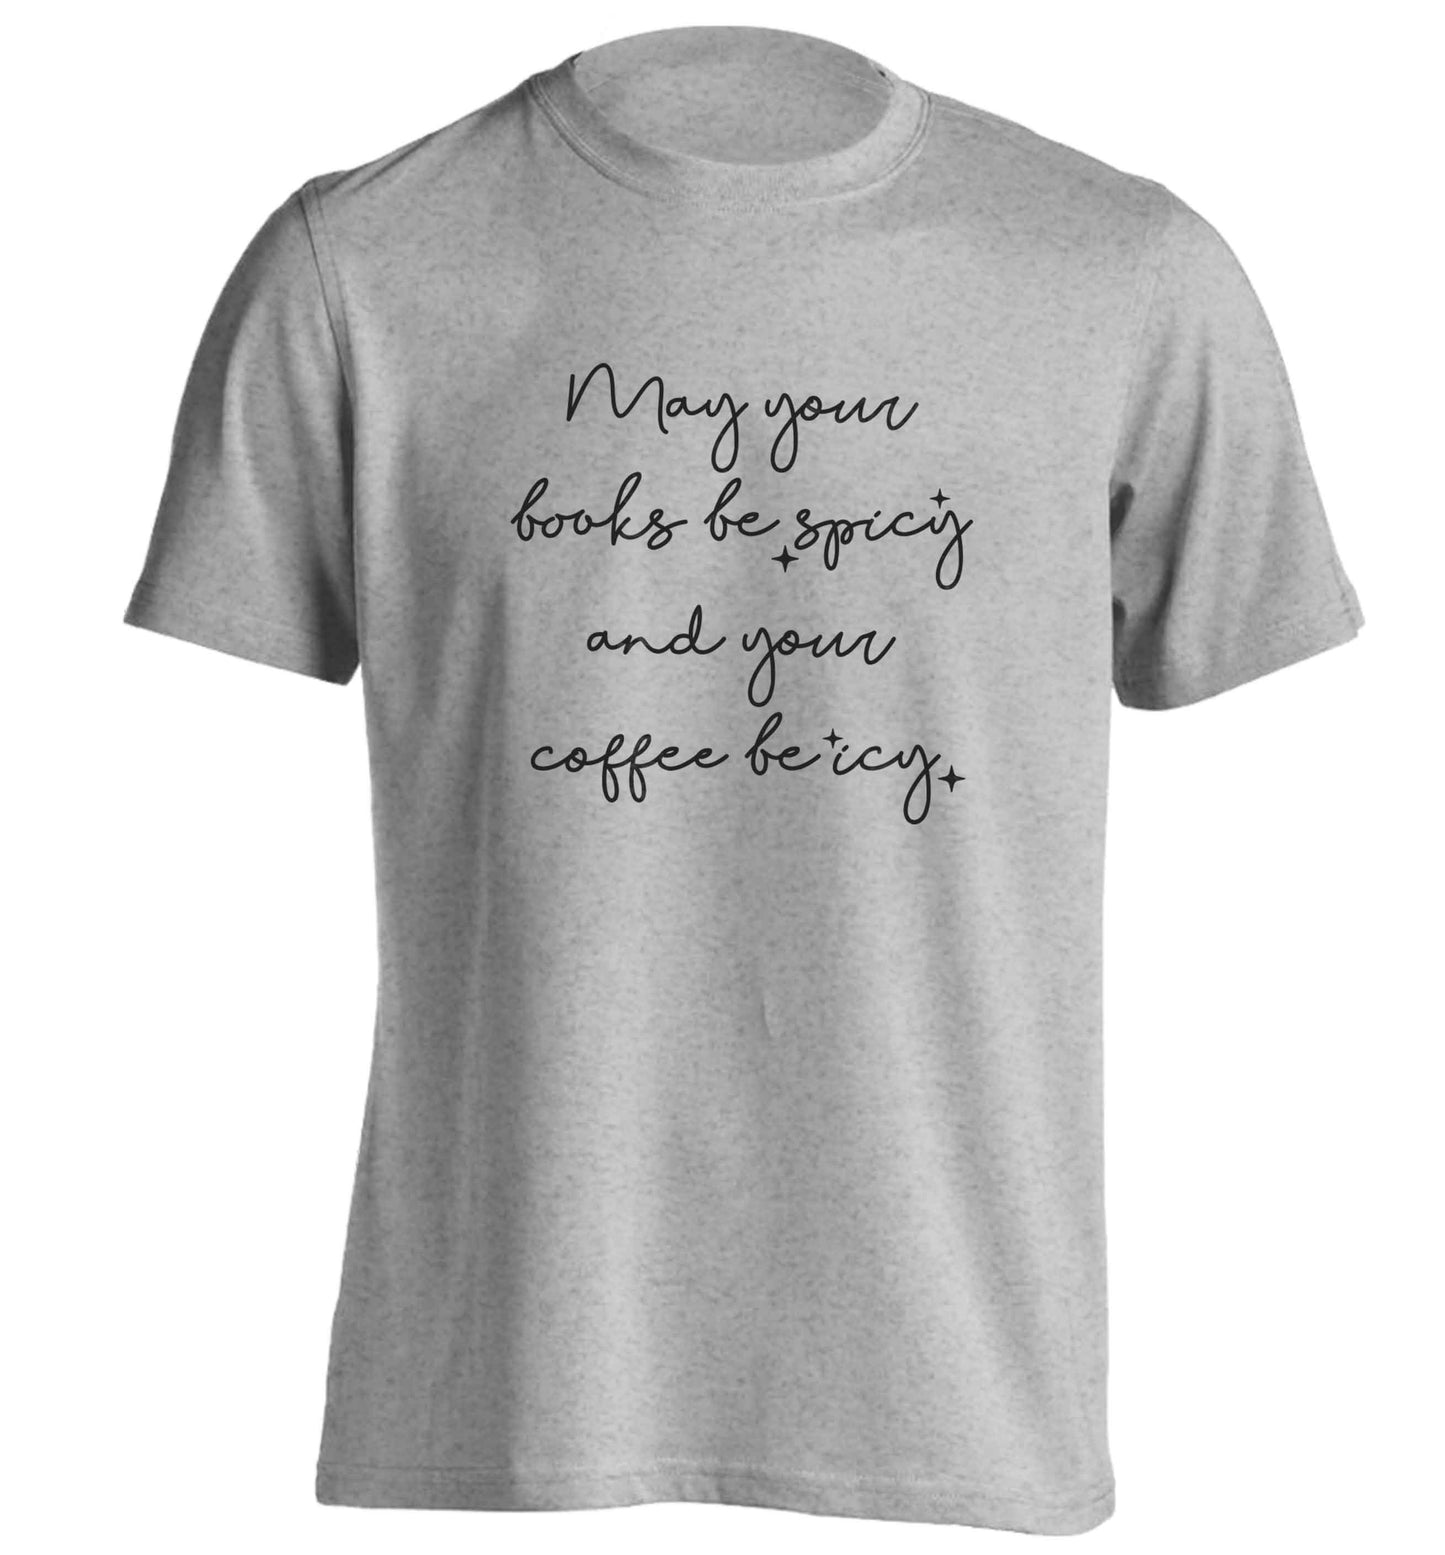 May your books be spicy and your coffee be icy adults unisex grey Tshirt 2XL